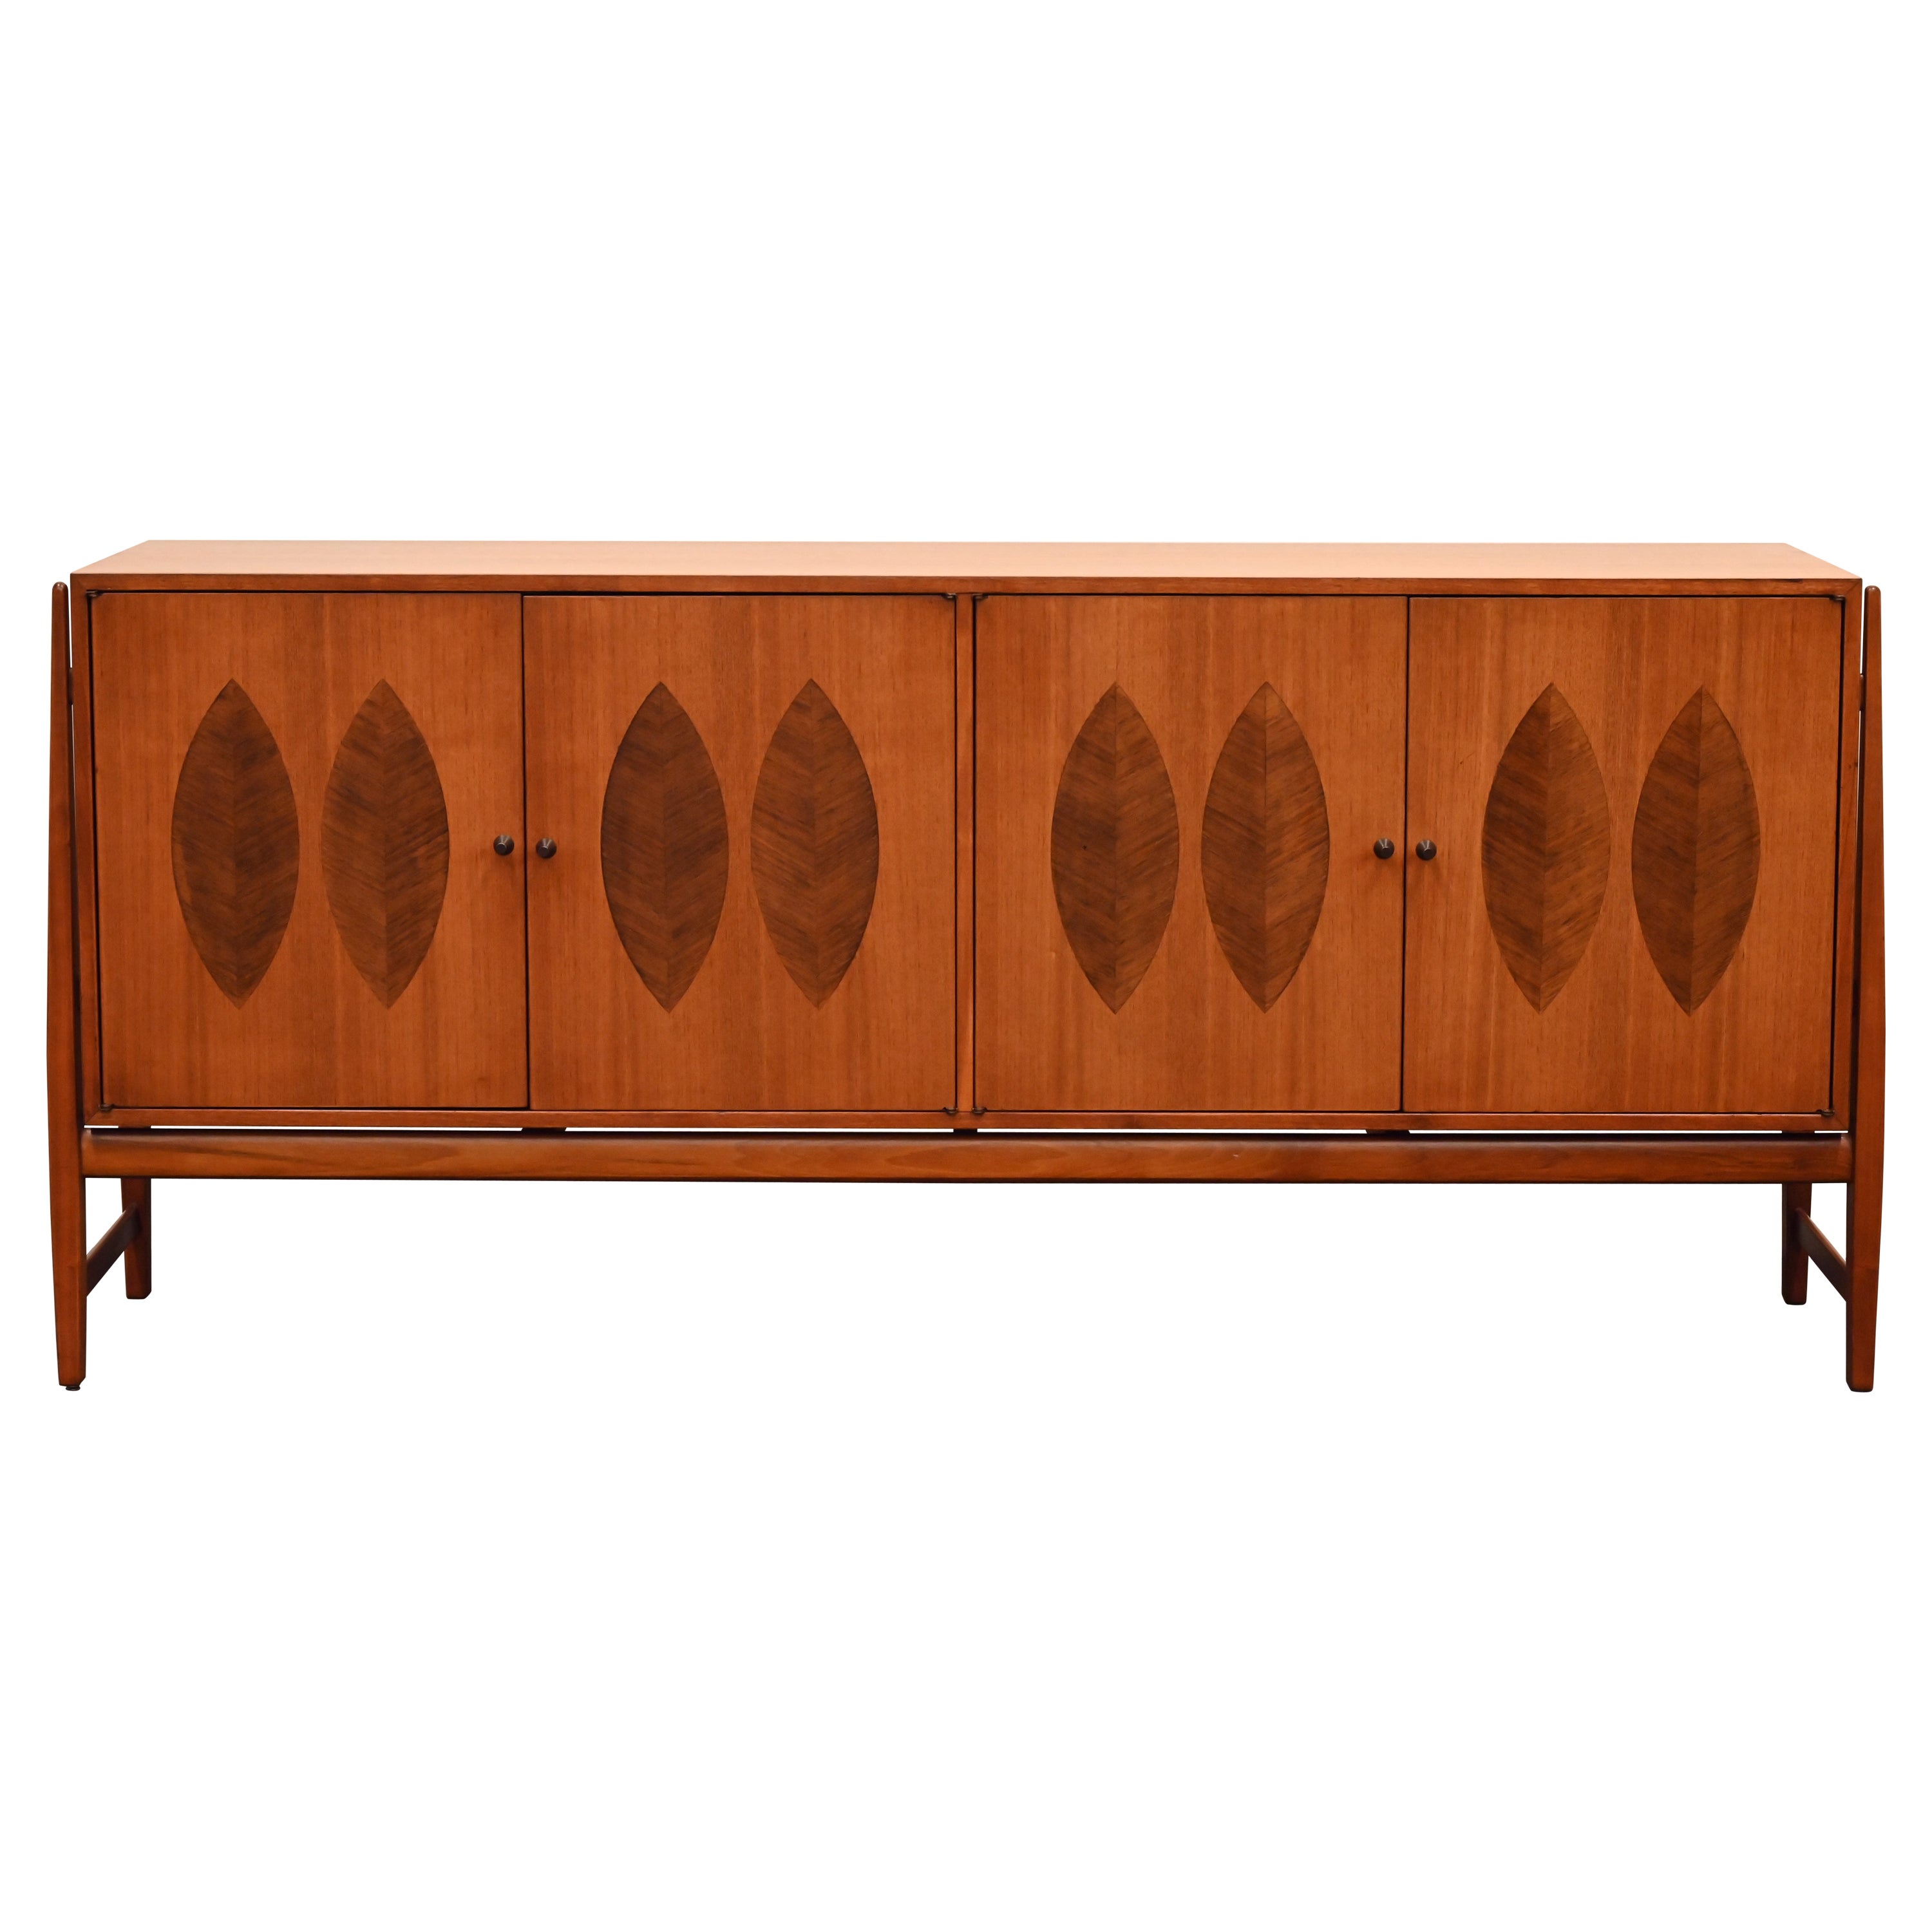 Rosewood and Walnut Credenza designed by Kipp Stewart for Calvin, 1960s